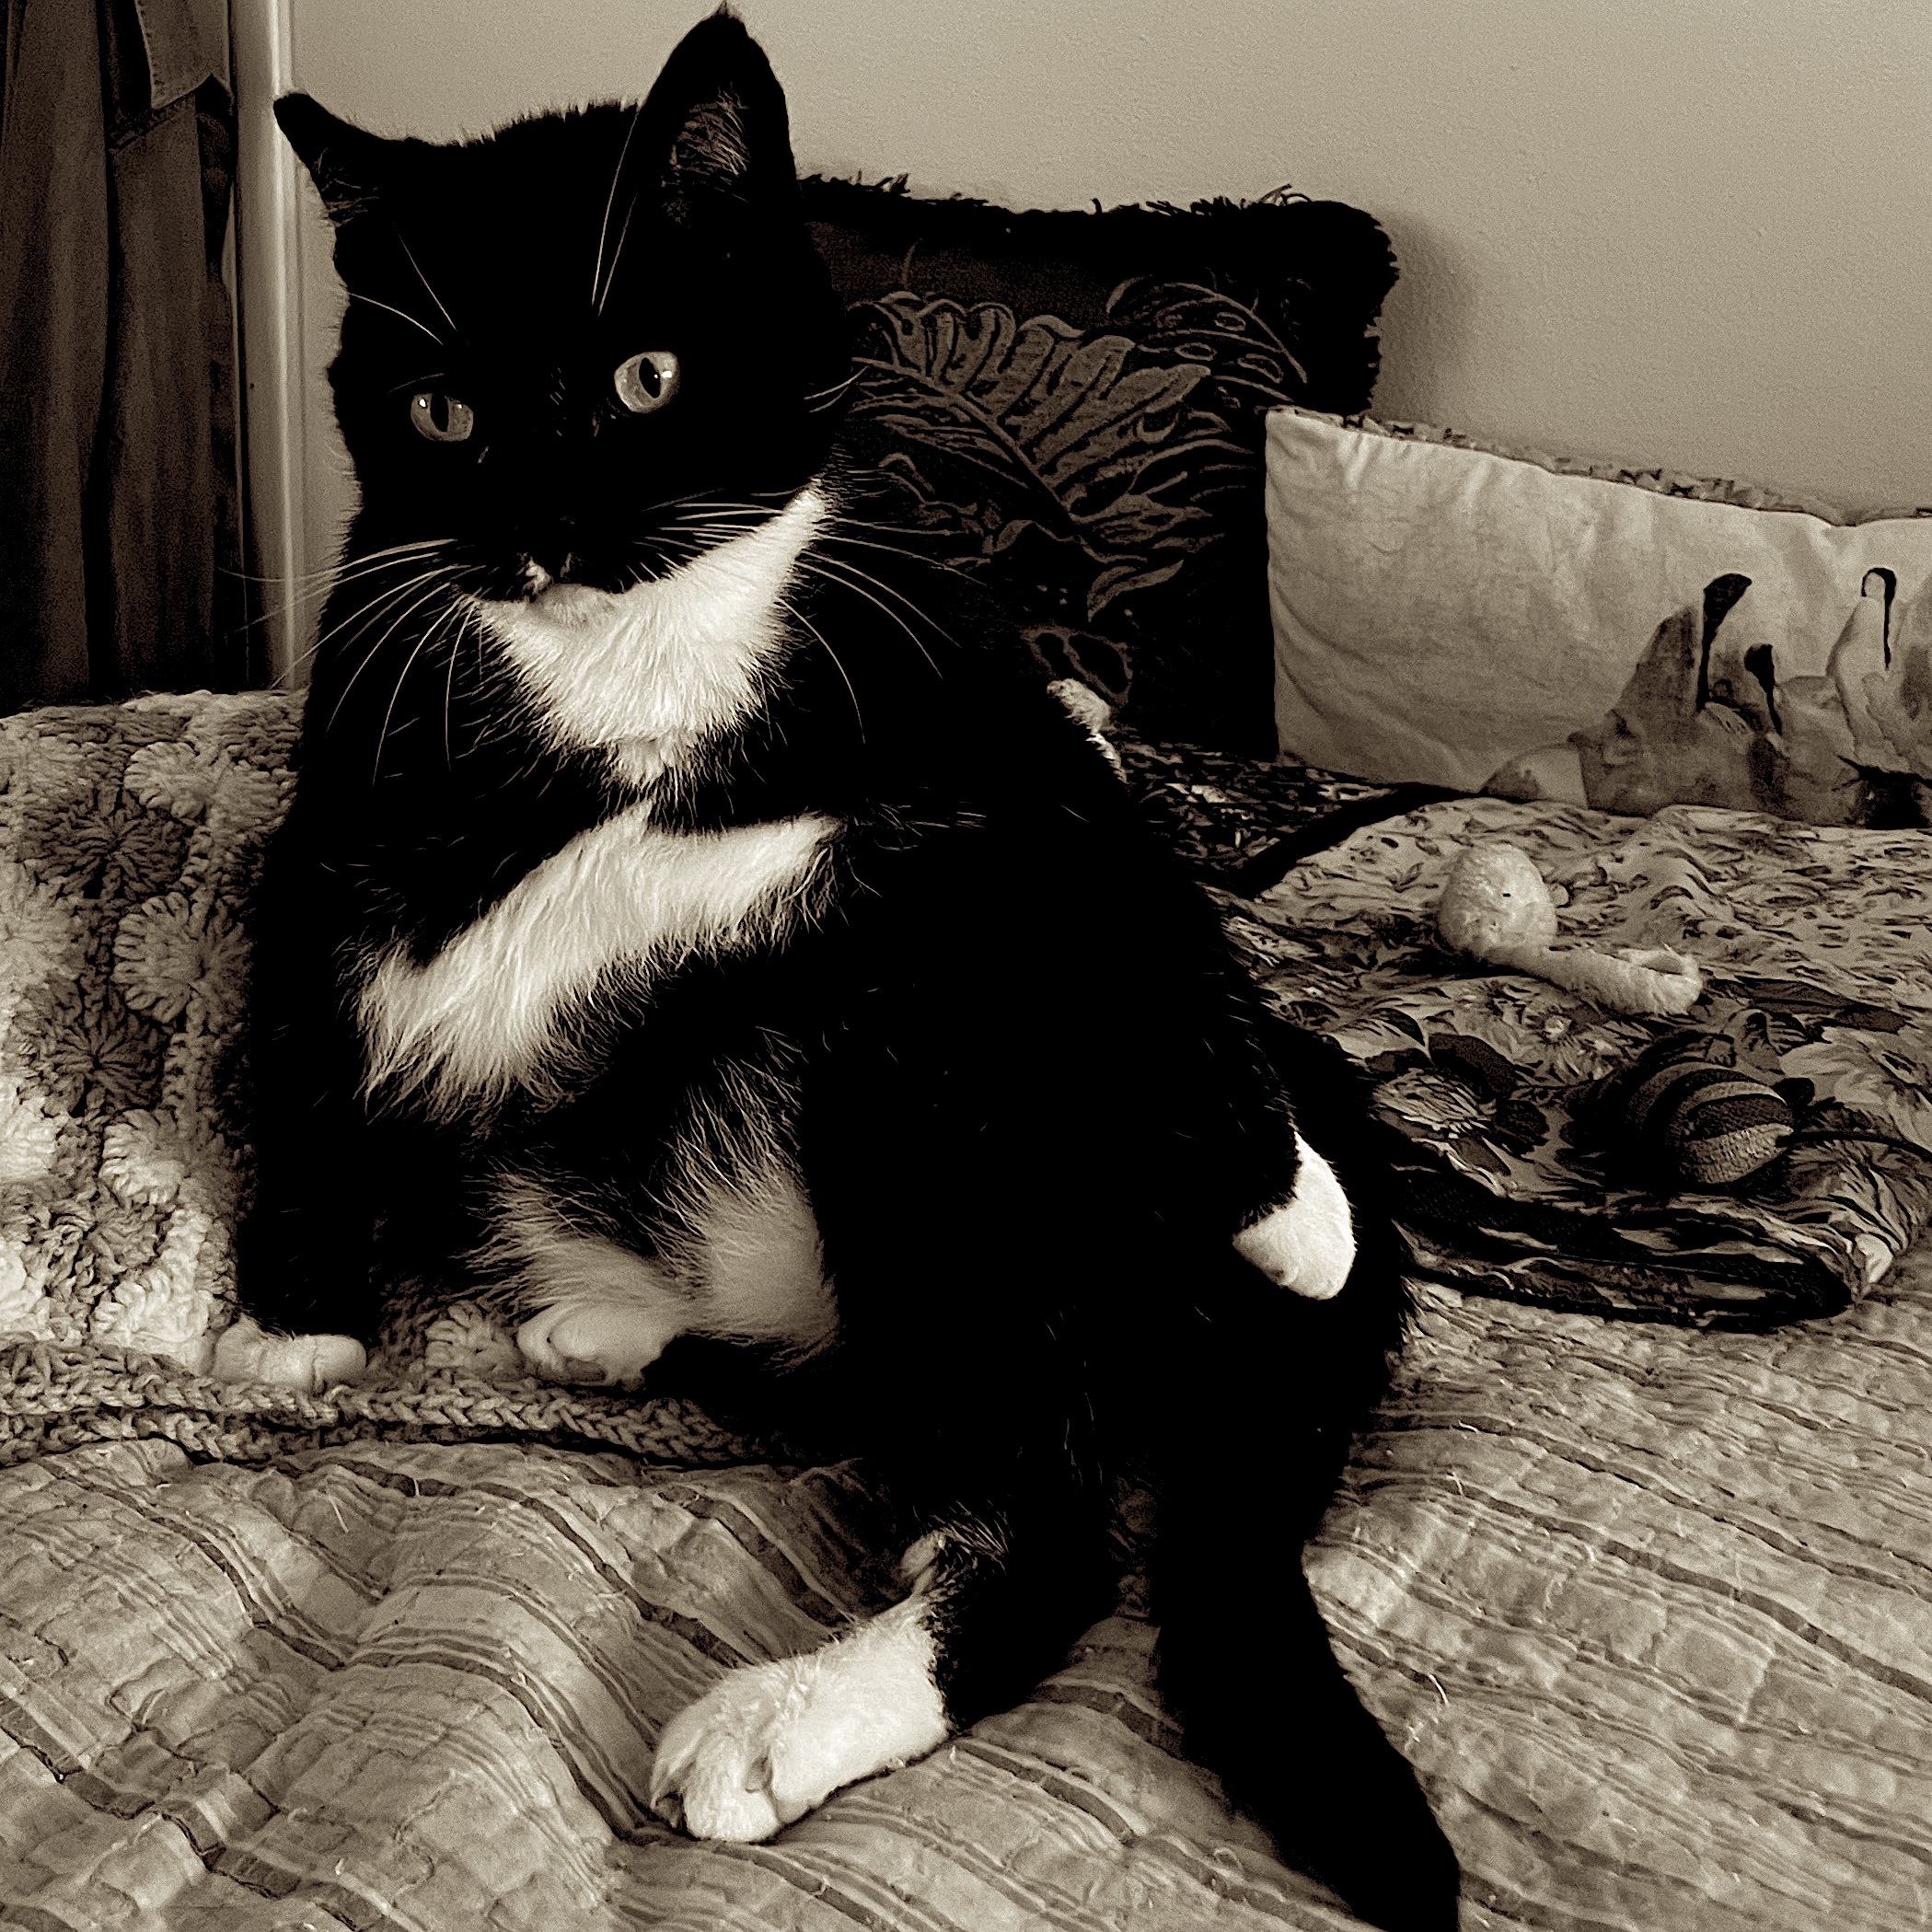 Black and white cat sitting like a person on a bed with pillow behind him.